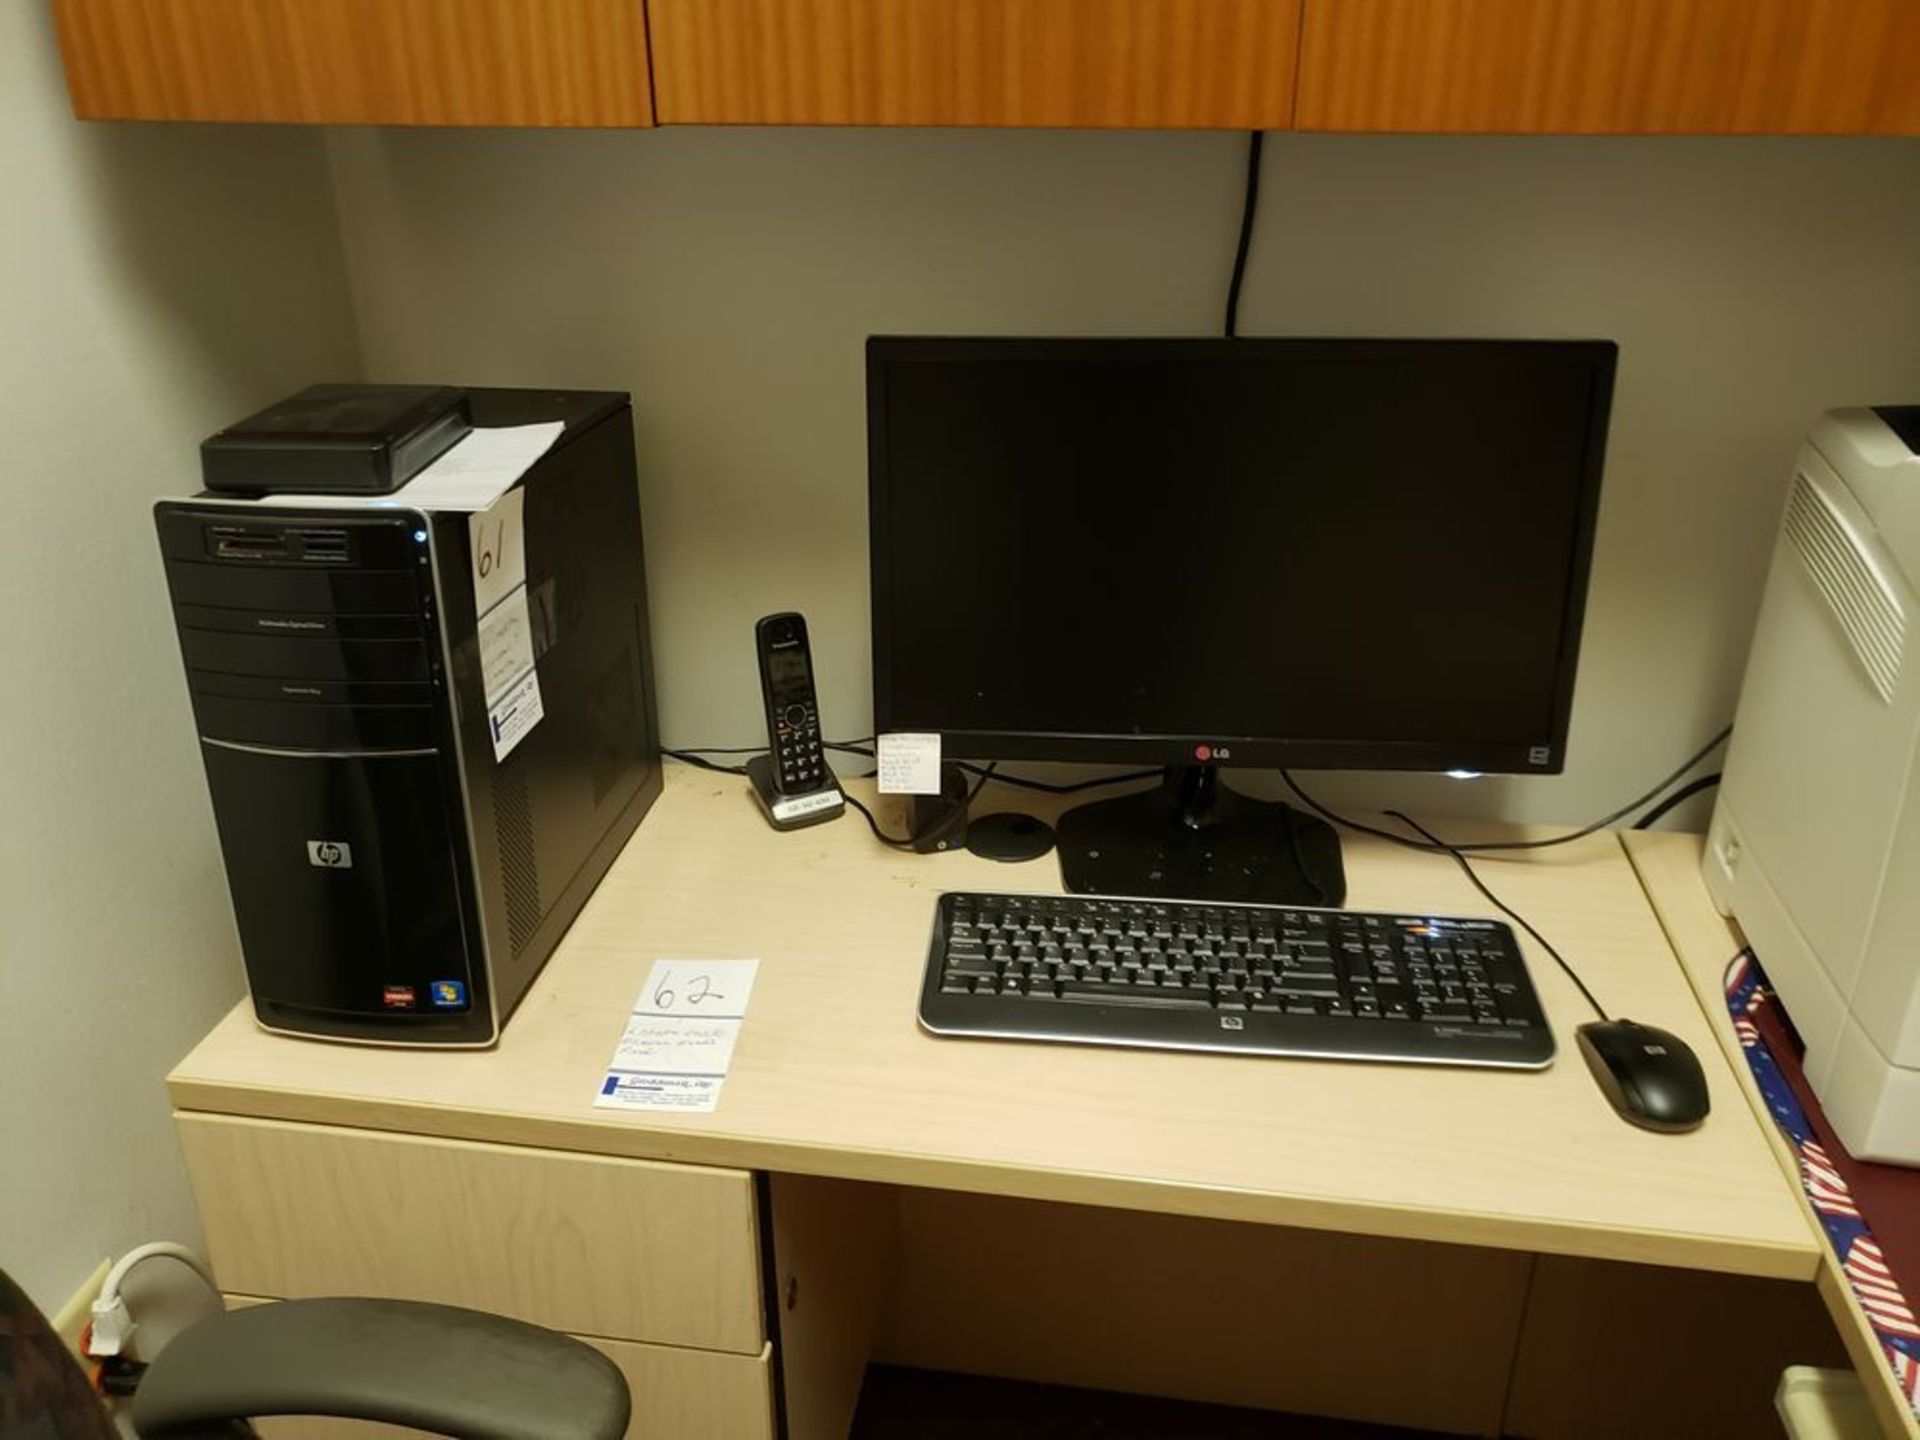 HP COMPUTER WITH WINDOWS 7, LG MONITOR, KEYBOARD AND MOUSE